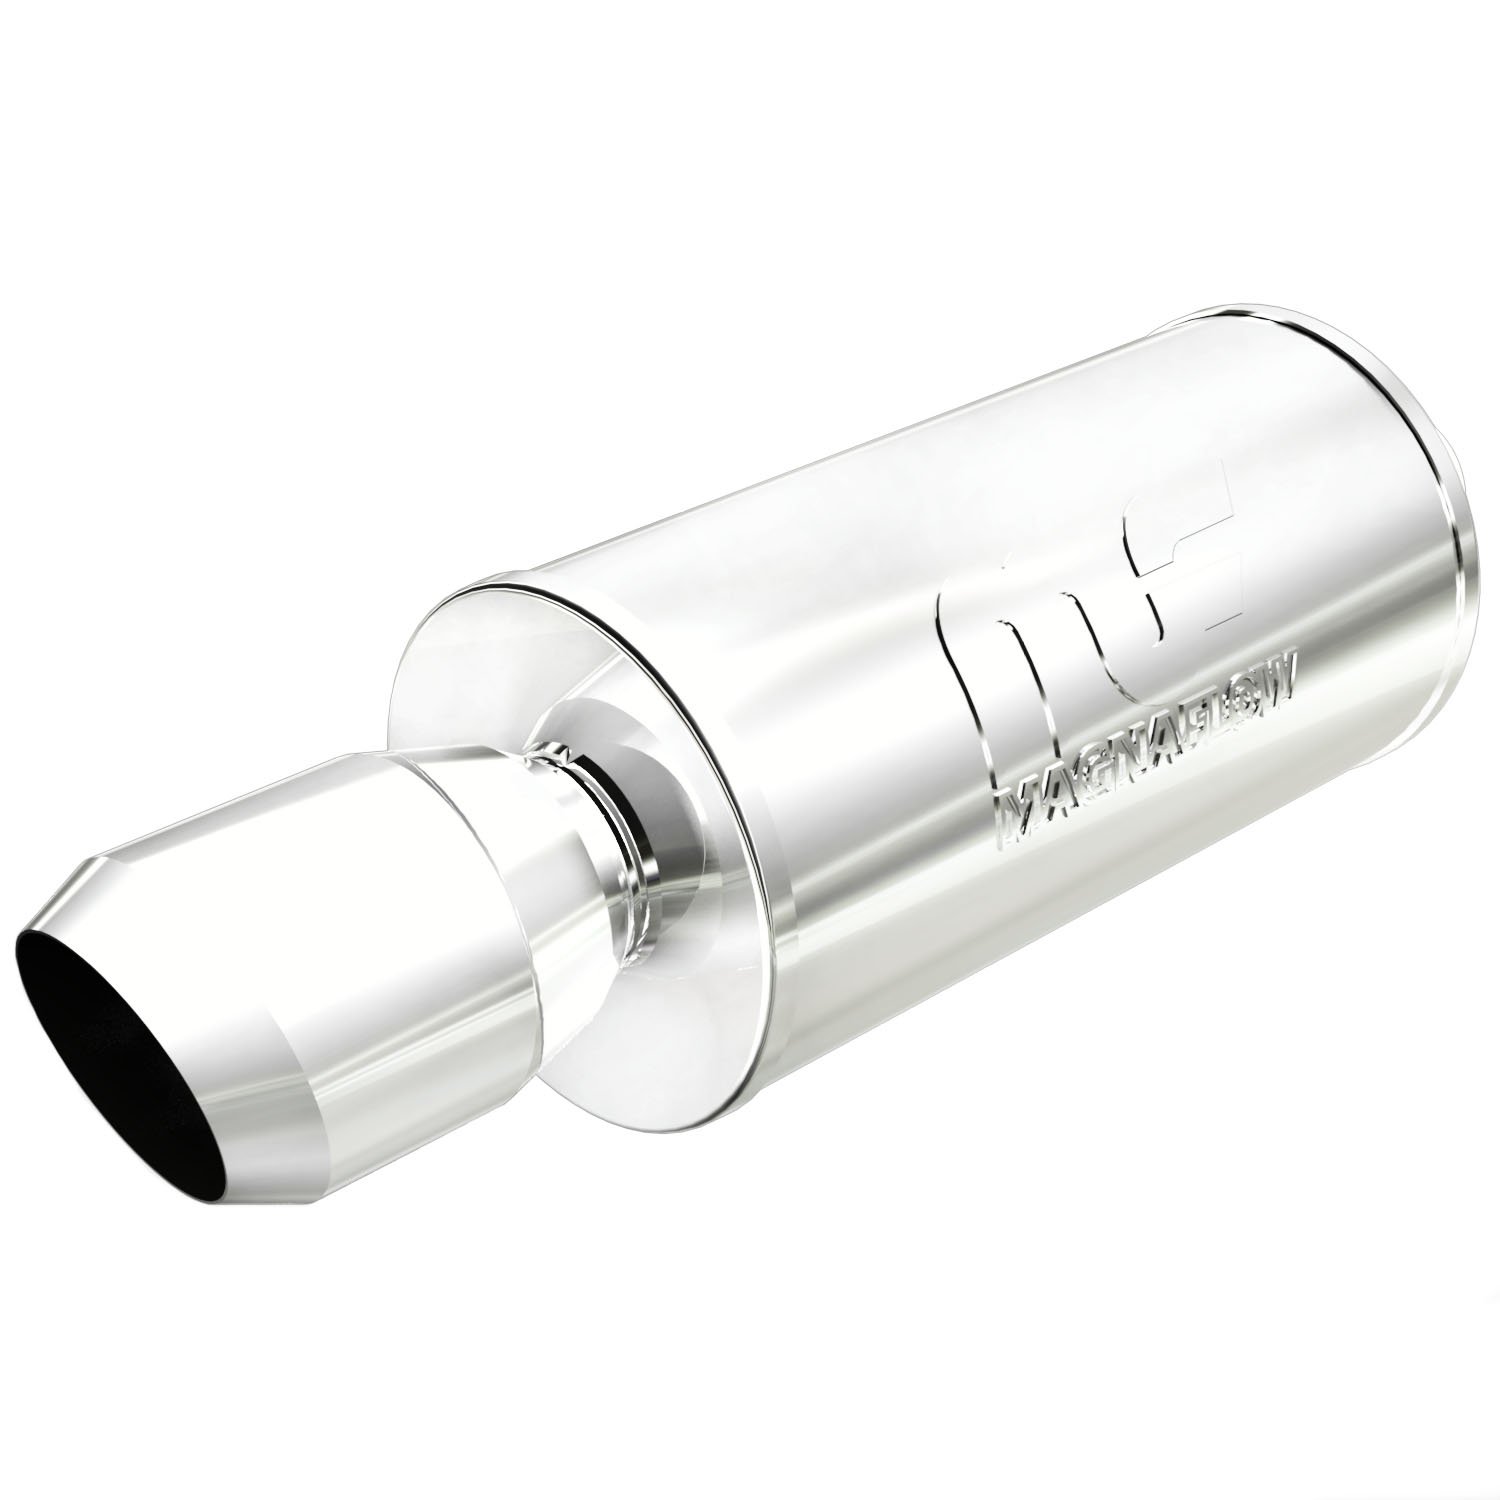 Street Series Universal Muffler With Single Tip Inlet/Outlet: 2.25"/4.5"